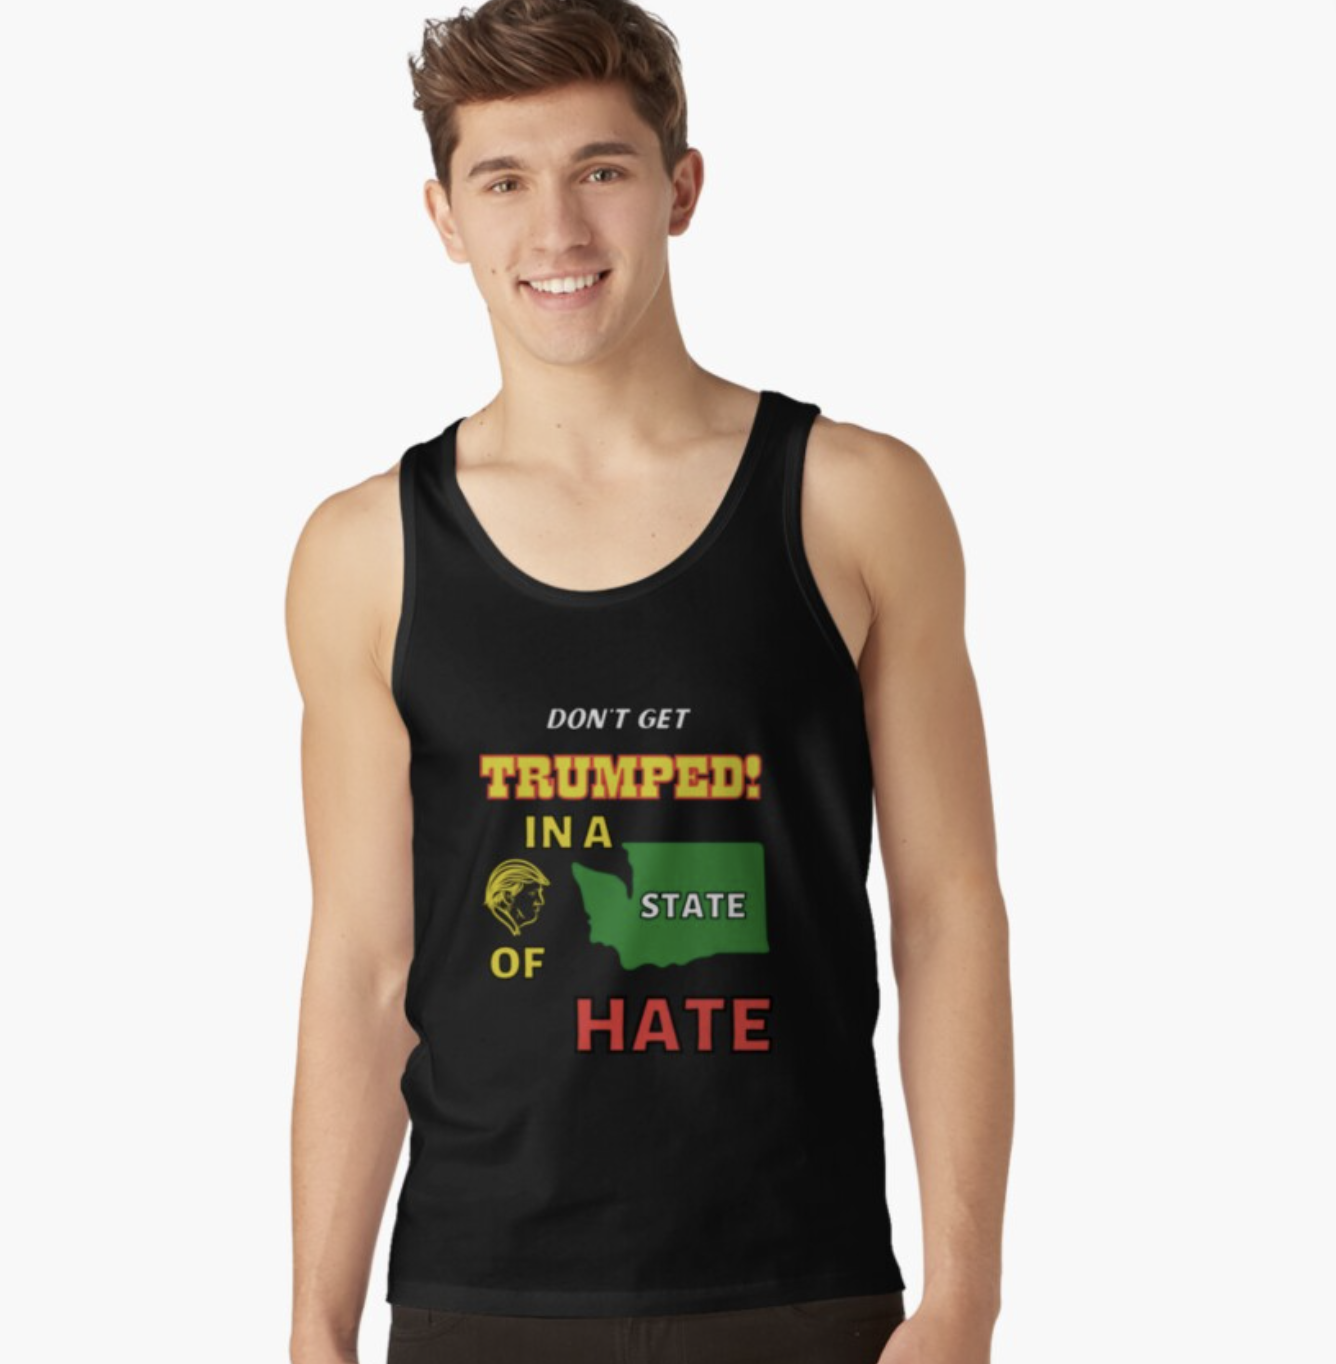 Trumped! In a State of Hate Tank Top